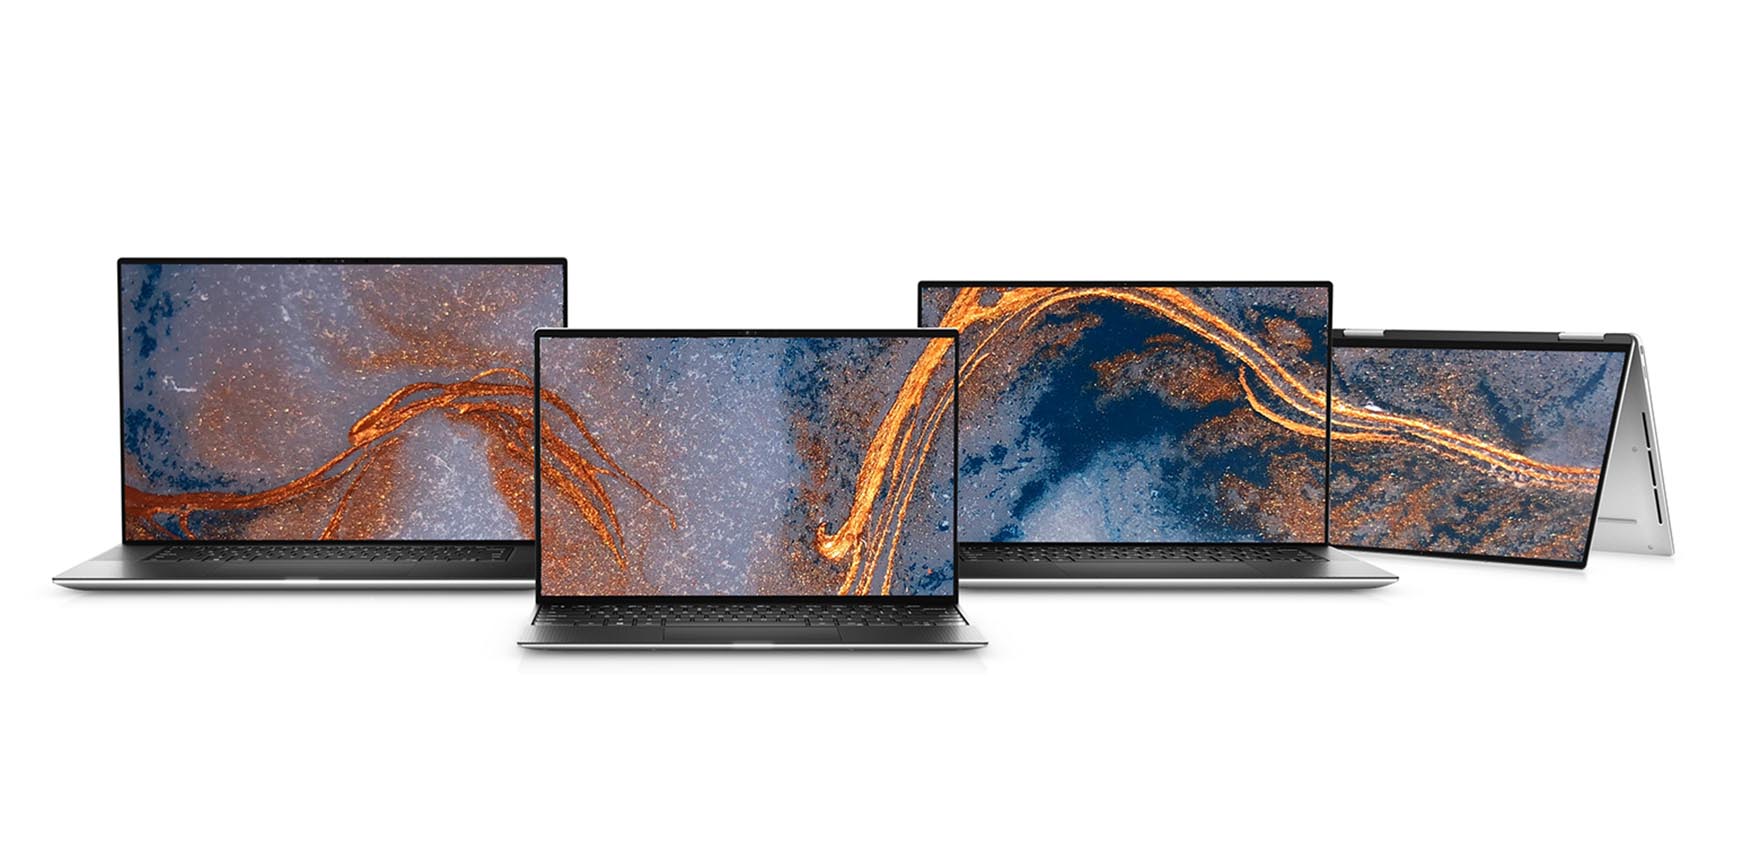 Dell XPS laptops, four in a row